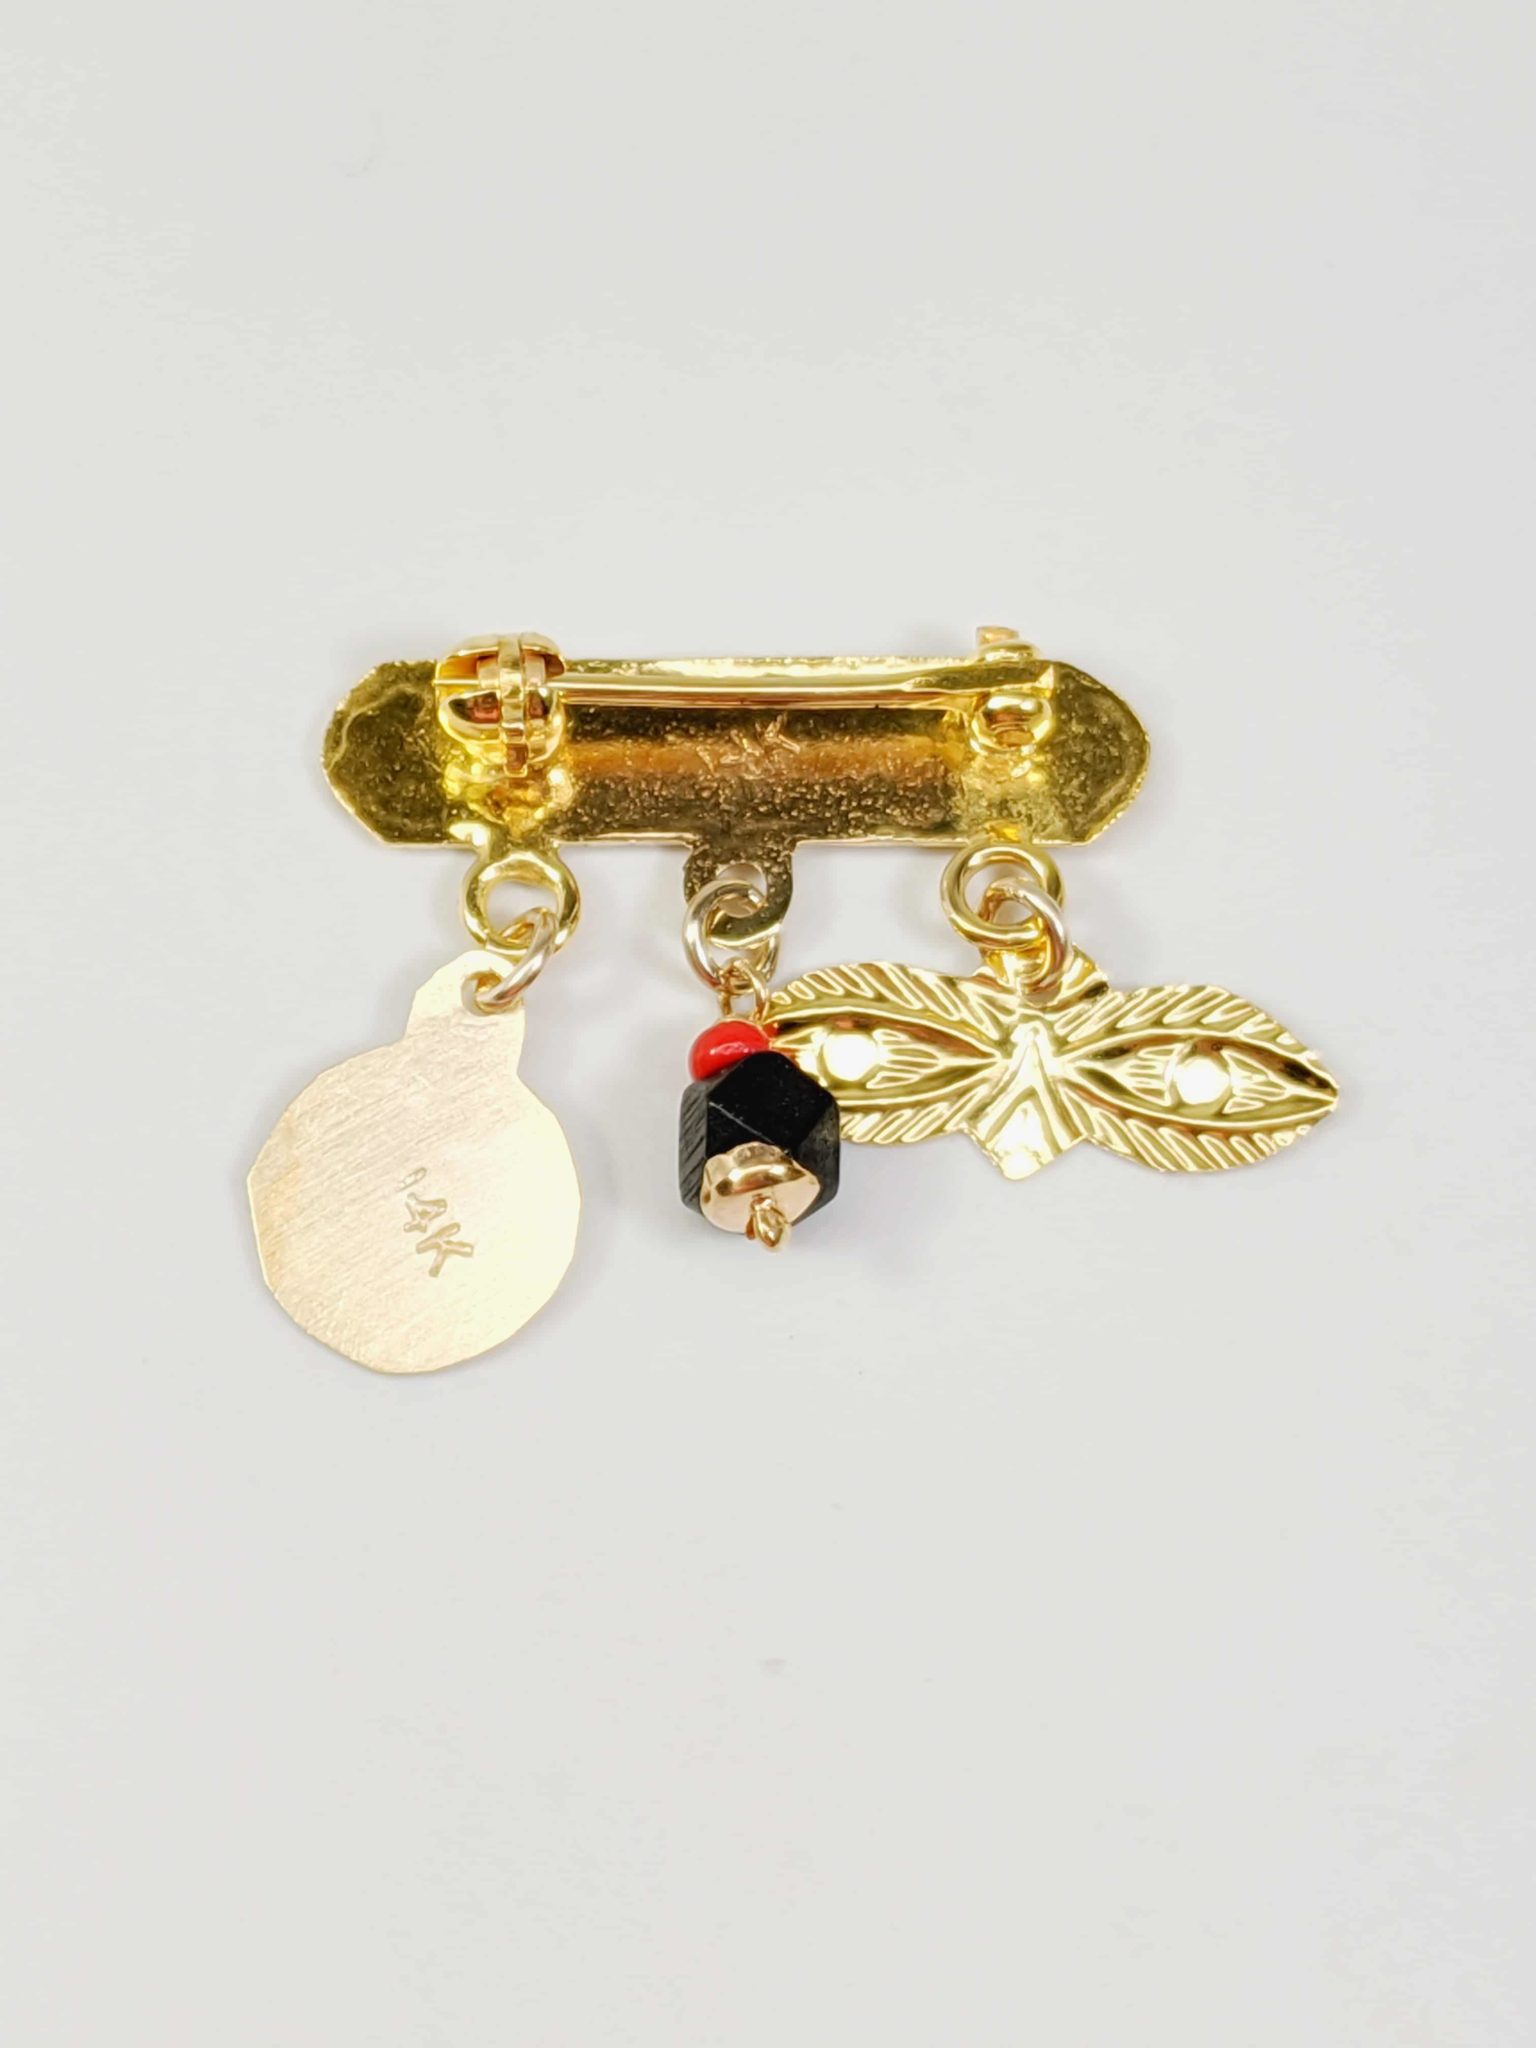 14K Yellow Gold "Dios Me Bendiga" Pin Brooch With Hanging Genuine Black Azabache Red Coral Ojos de Santa Lucia Eyes and Angel Medal Back View